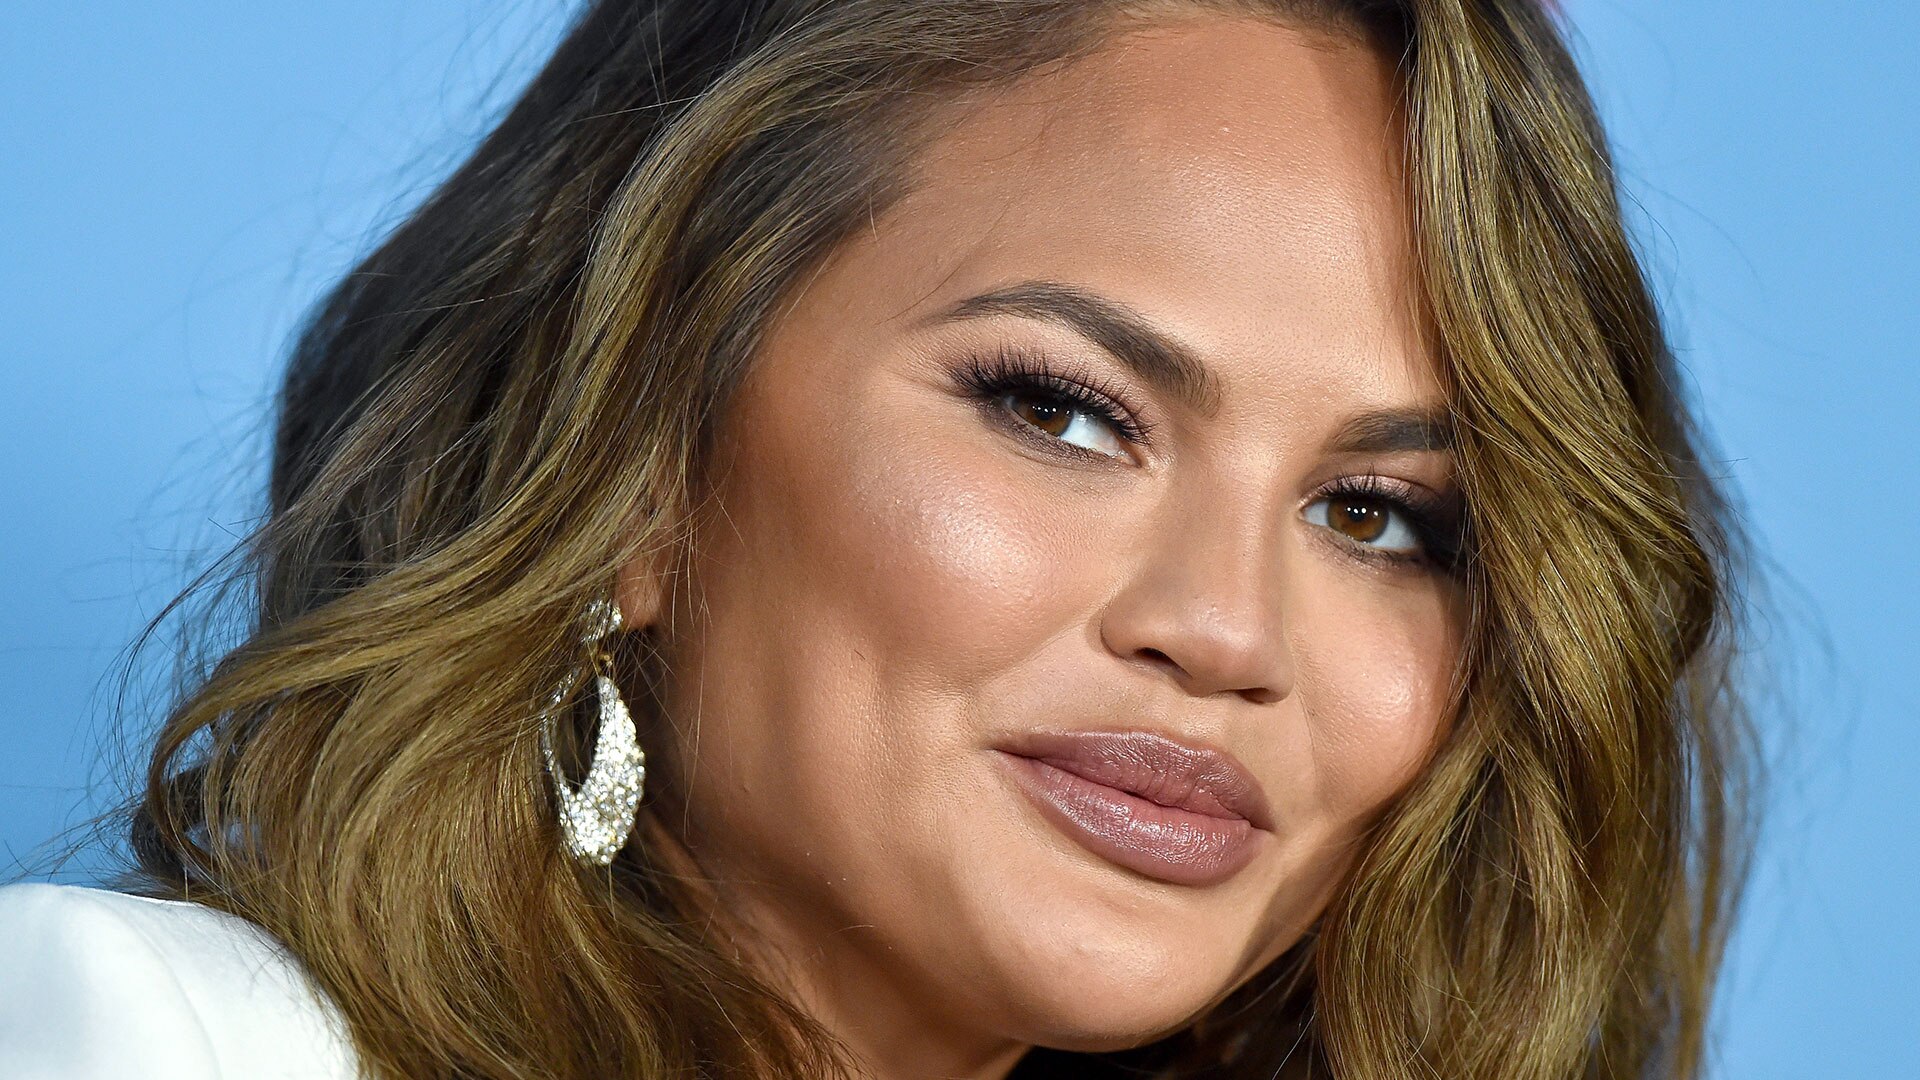 Chrissy Teigen shares topless snap before flying to Clive 